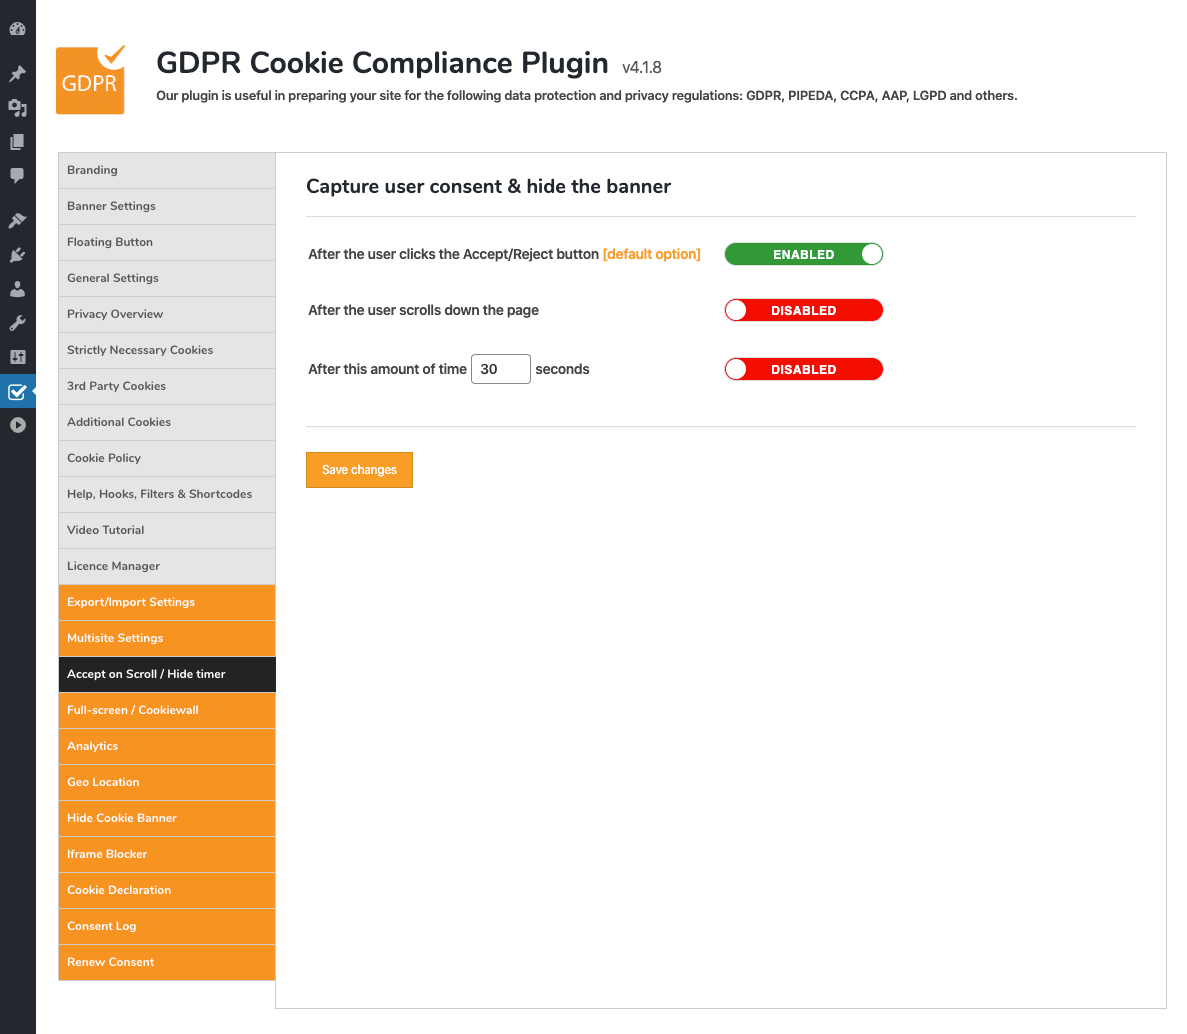 GDPR Cookie Compliance - Admin - Accept on Scroll / Hide timer [Premium]